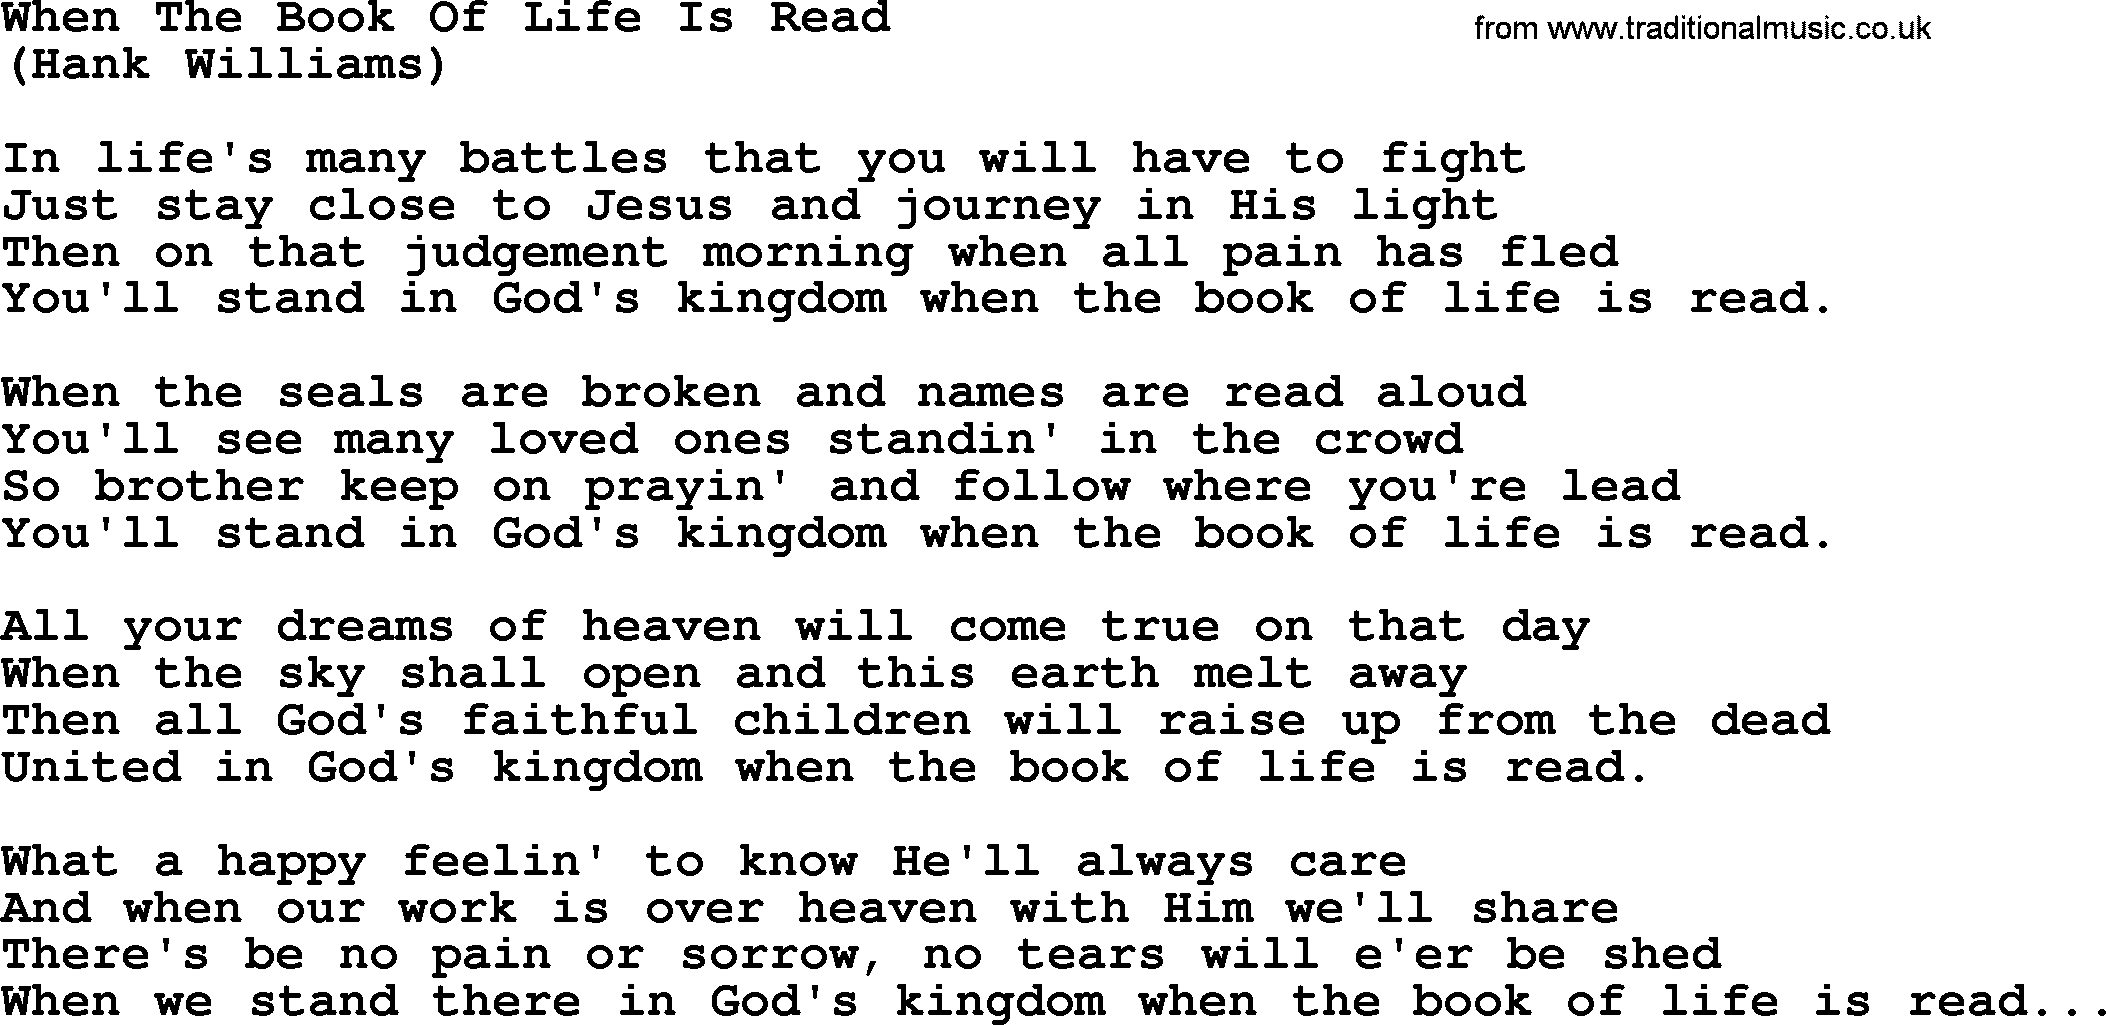 Hank Williams song When The Book Of Life Is Read, lyrics